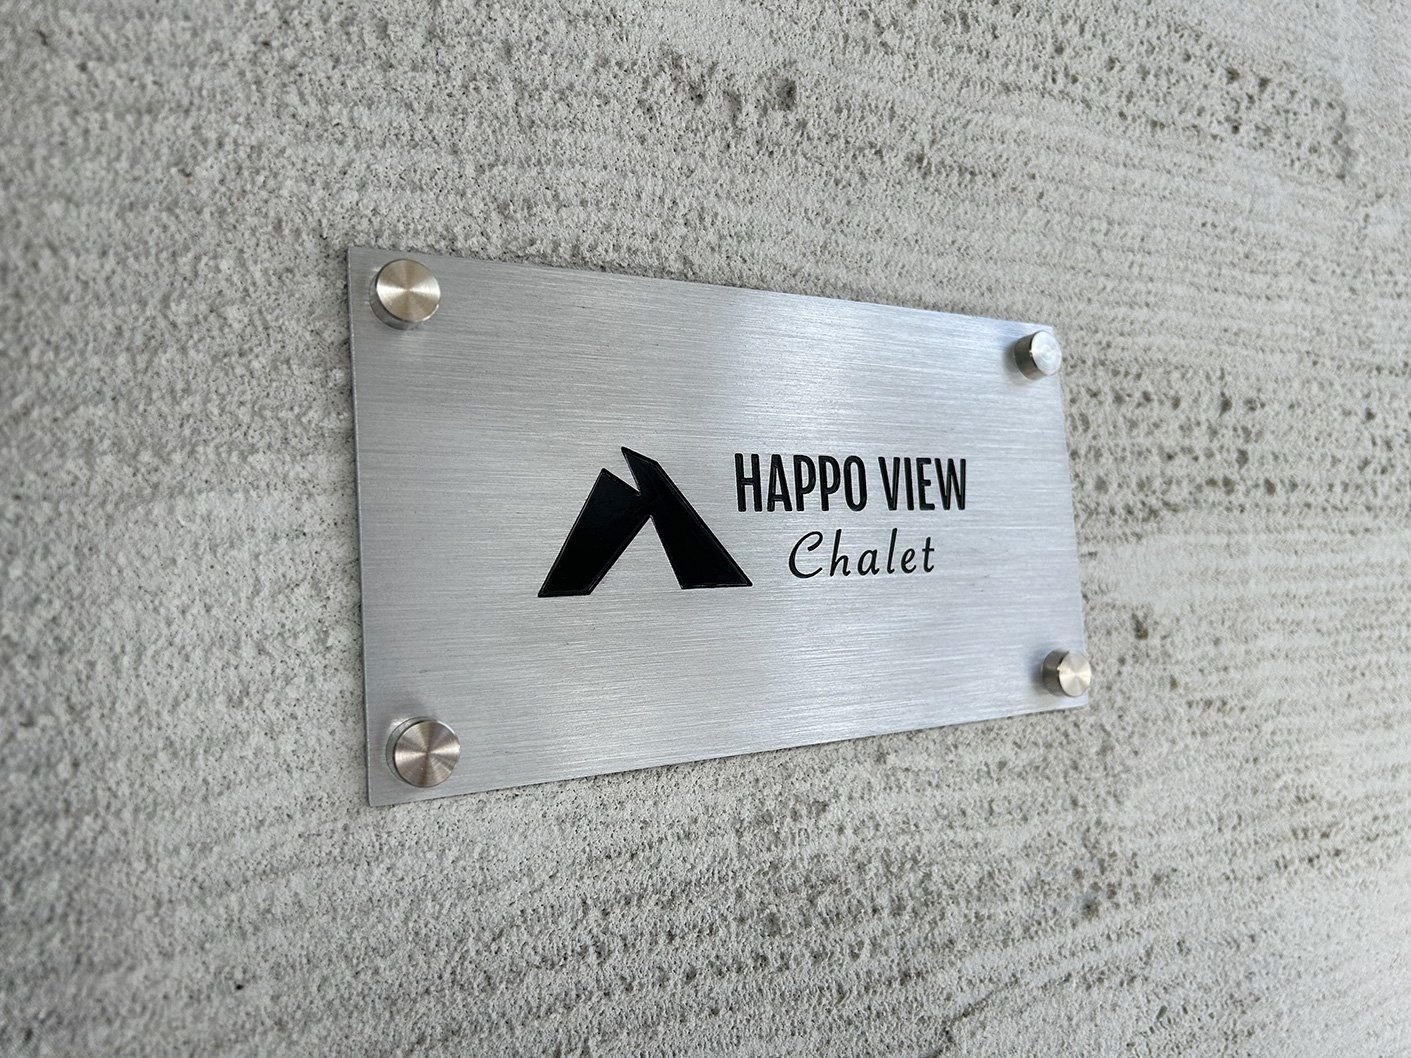 happo-view-chalet-sign-.jpg